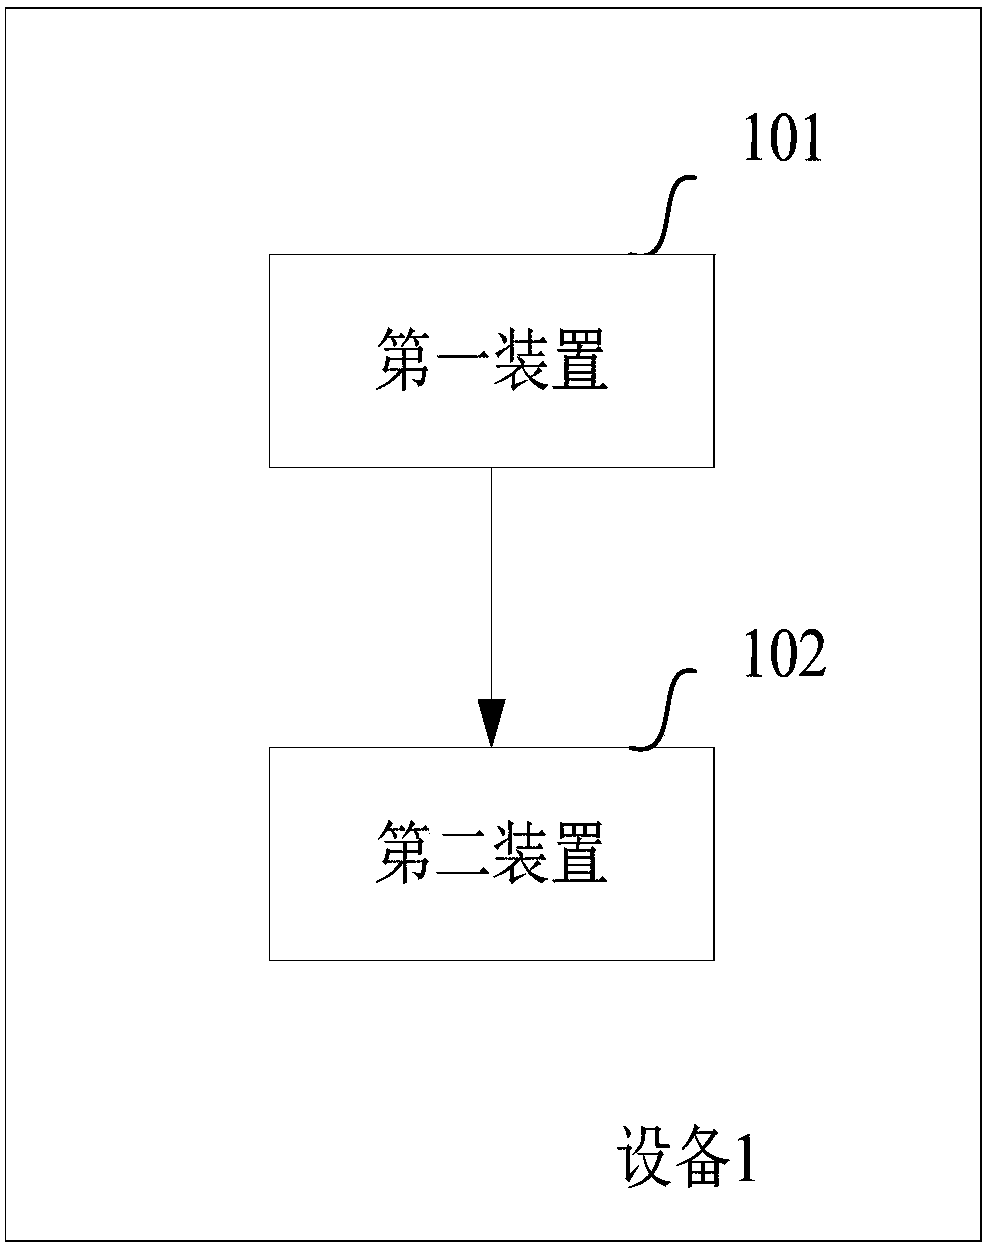 Method and equipment for realizing wireless access point connection